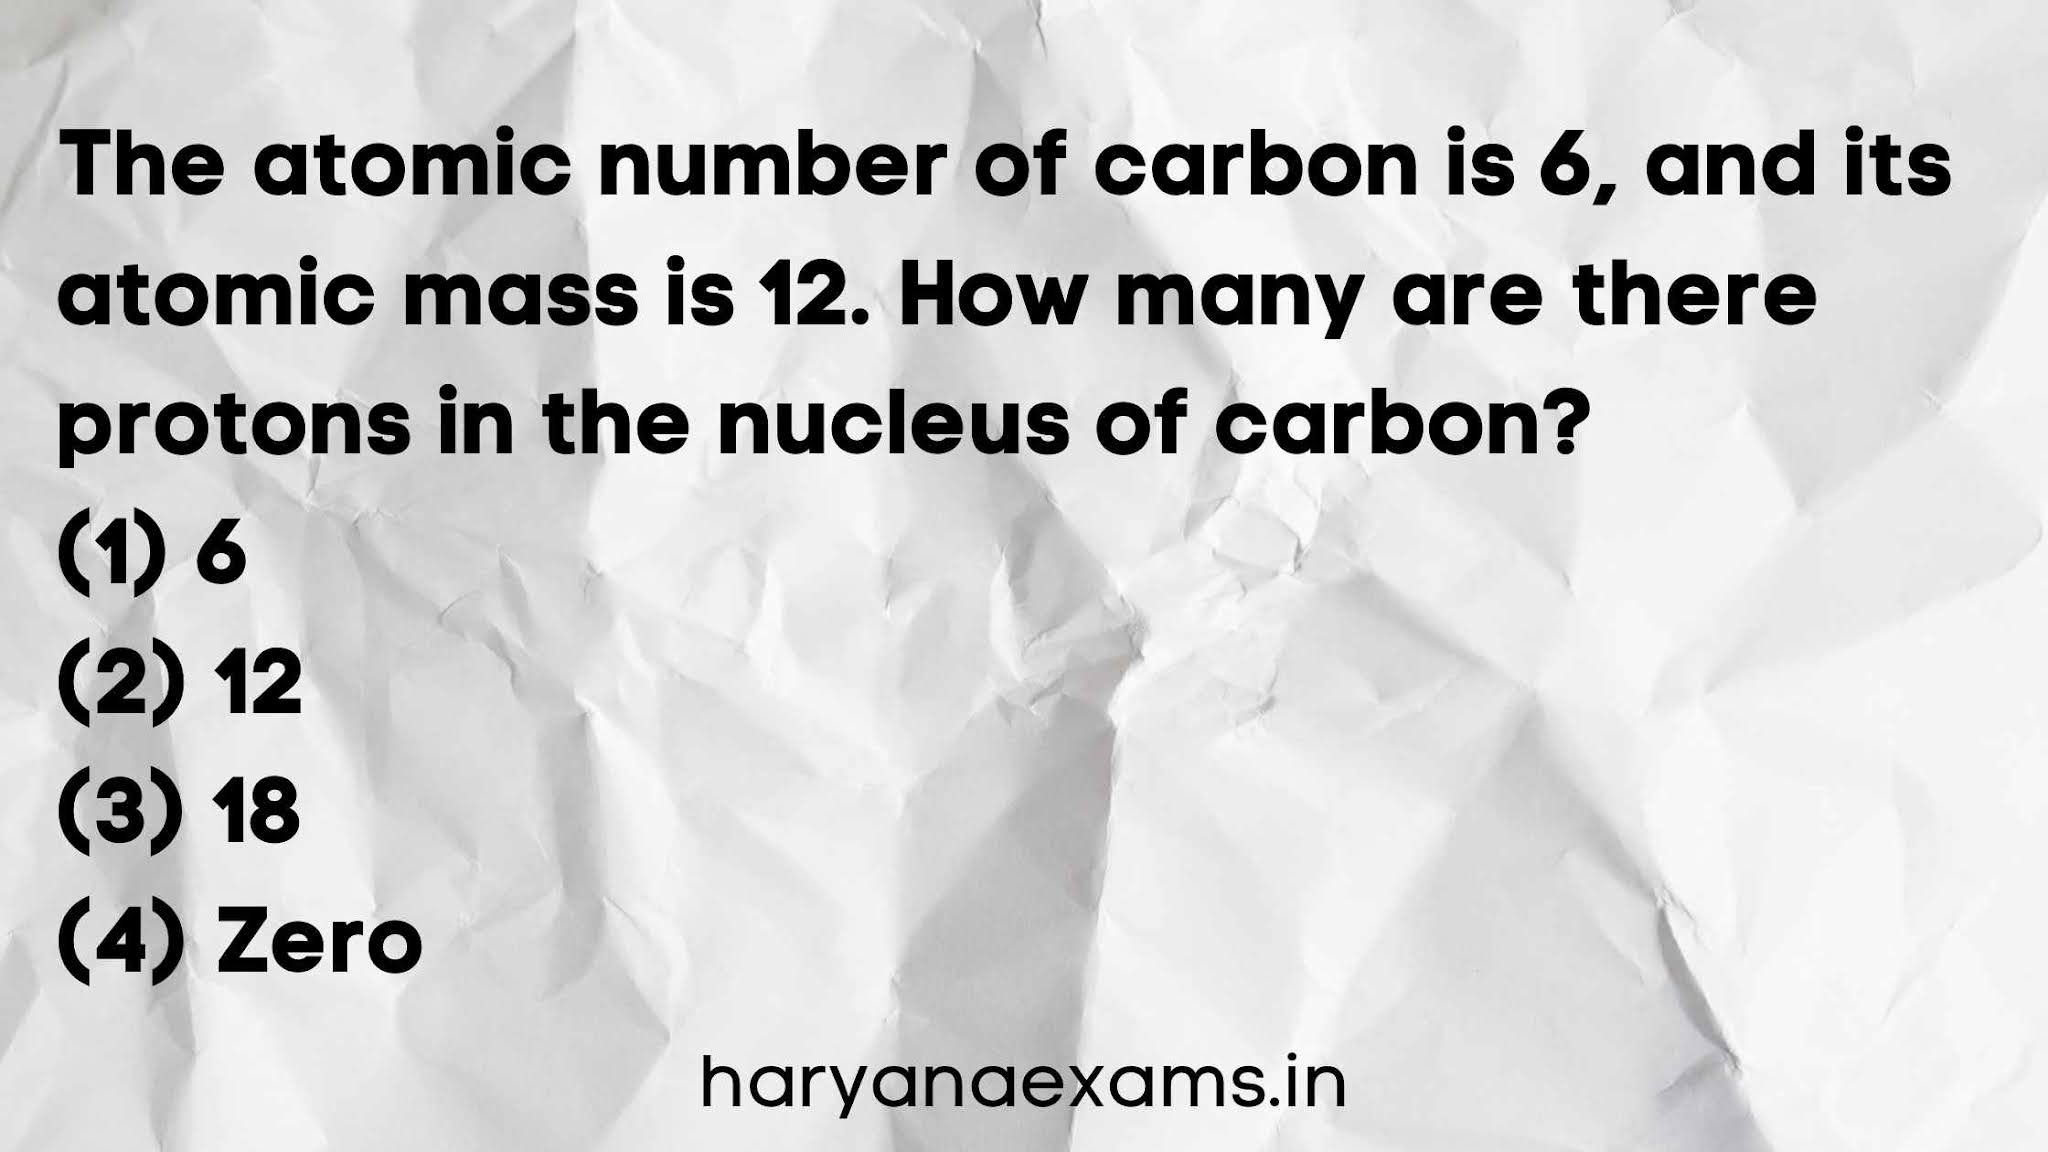 The atomic number of carbon is 6, and its atomic mass is 12. How many are there protons in the nucleus of carbon?   (1) 6   (2) 12   (3) 18   (4) Zero